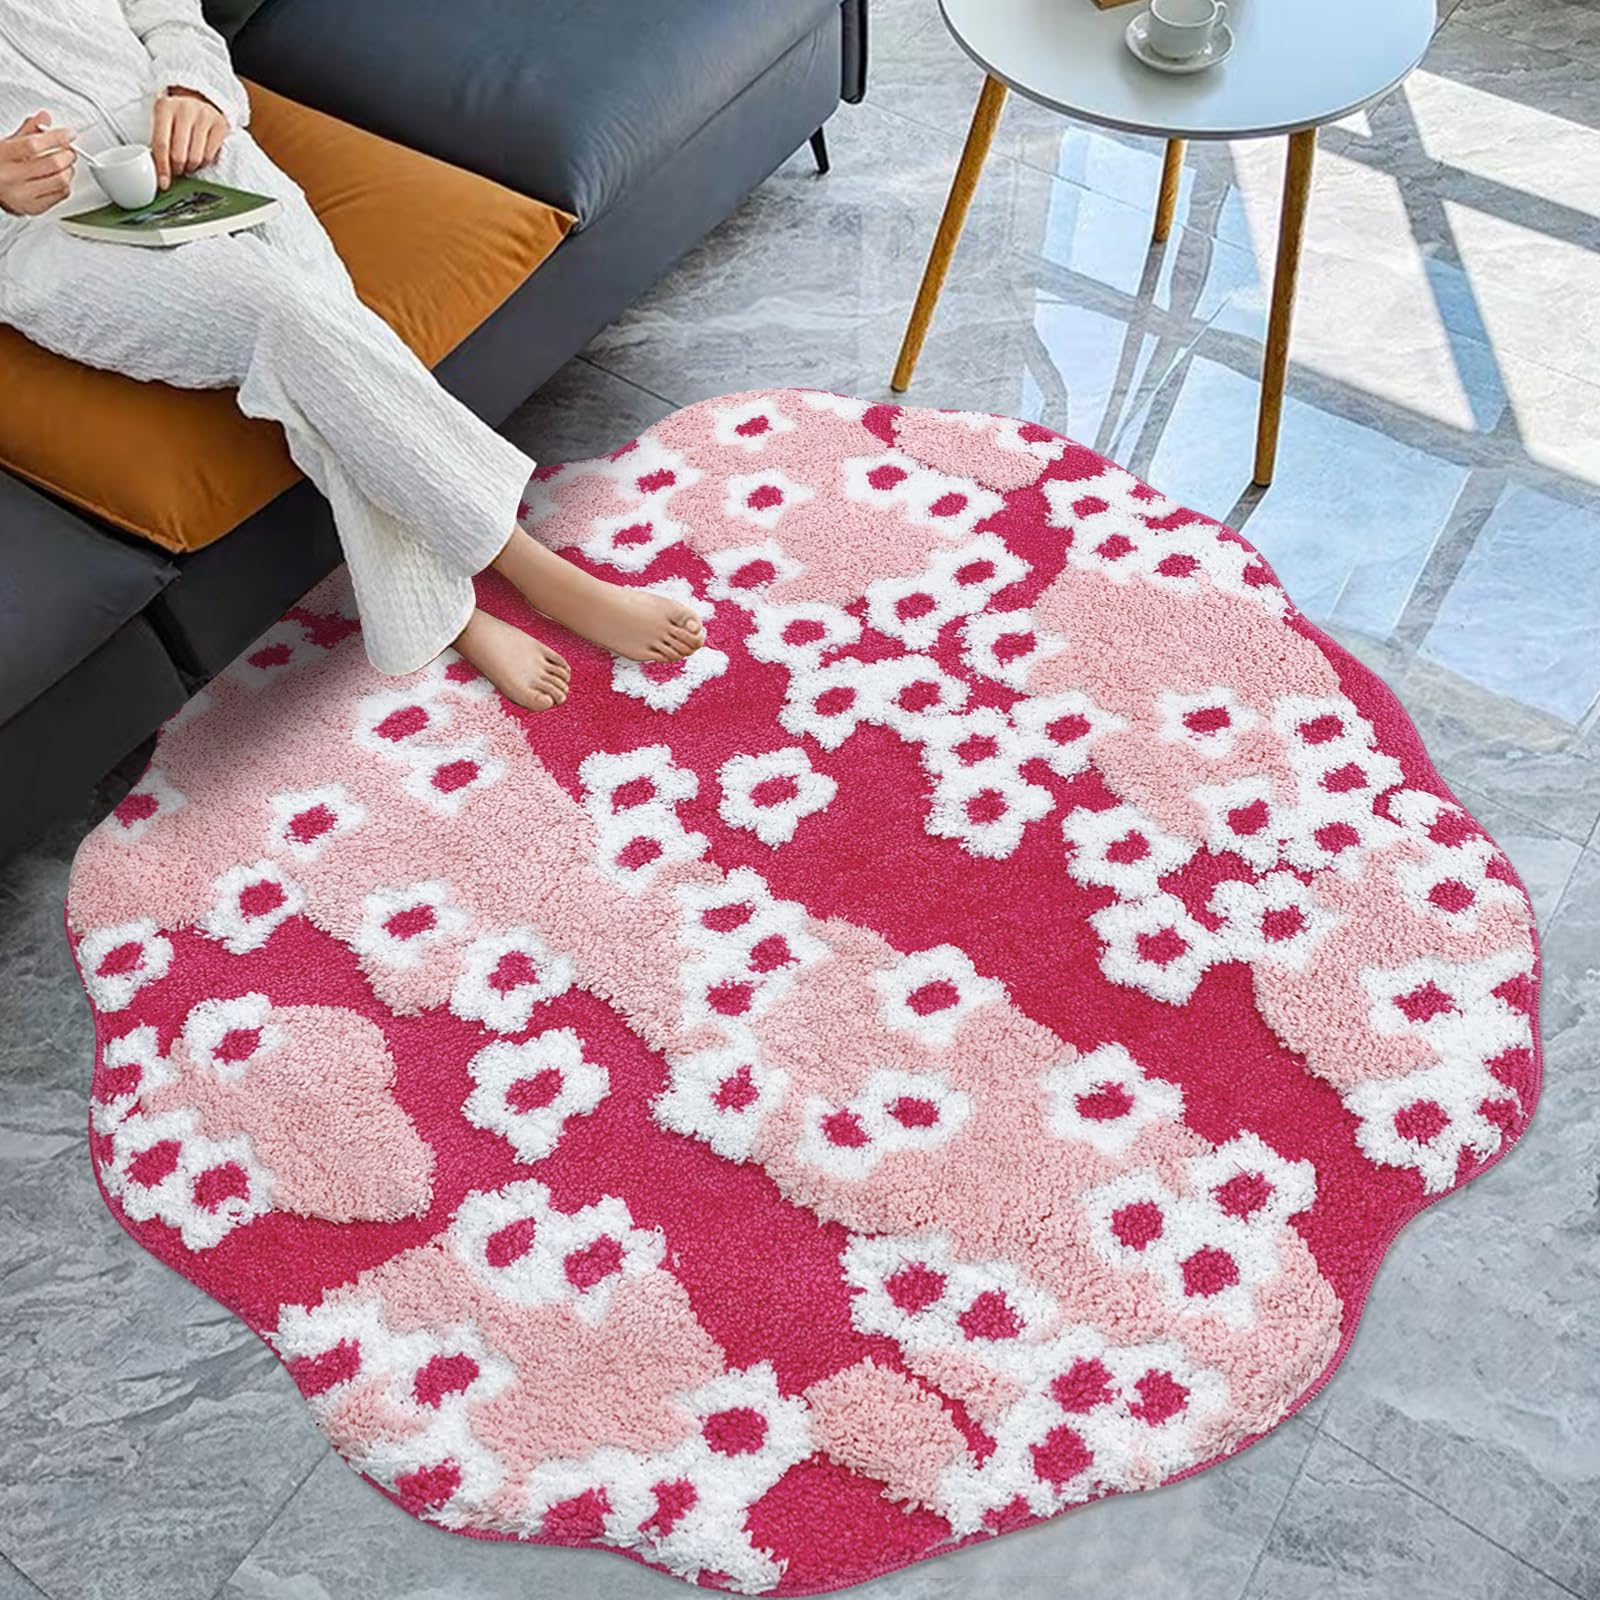 USTIDE Moss Area Rug, Floral Shape Area Rugs Super Fluffy and Washable Carpet Anti-Slip Round Farmhouse Floor Mat Multi-Colored Rug for Bedroom Playroom Kitchen Decor (Pink,39.3’’)